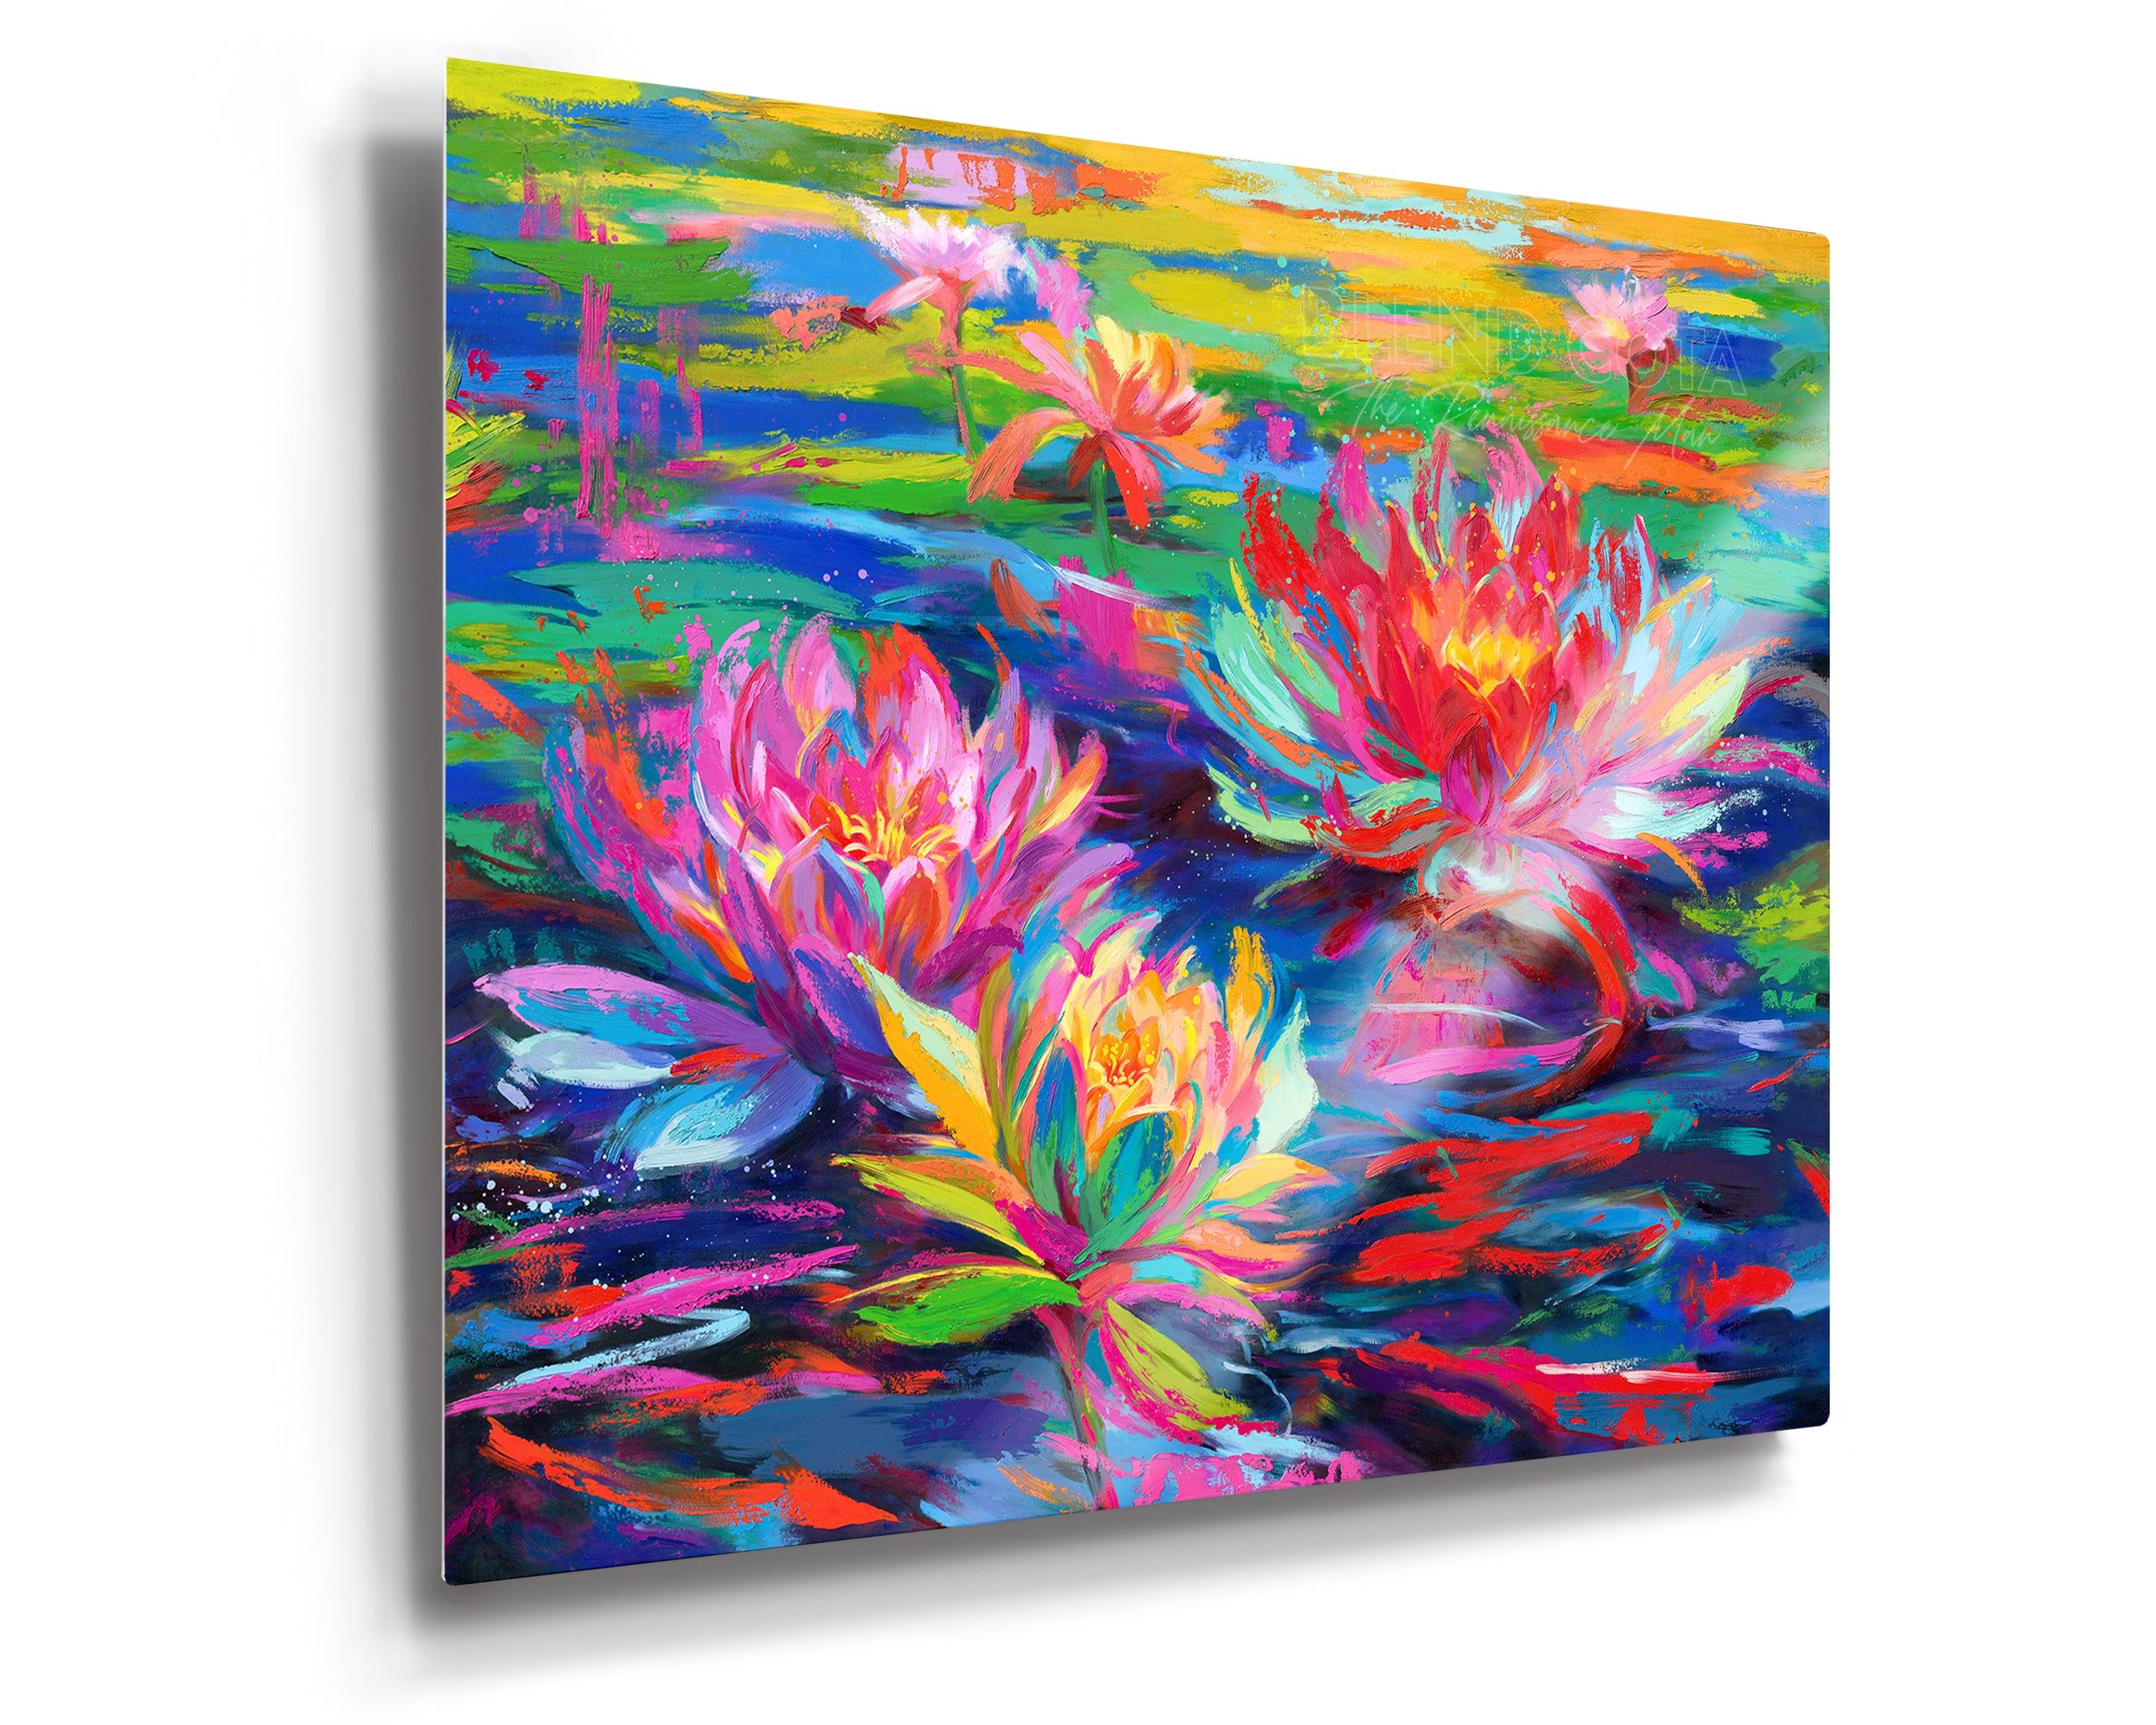 Limited edition print on metal of red, pink and yellow water lilies blooming in a pond of lily pads, abundant and vibrant flowers in colorful brushstrokes, color expressionism style.